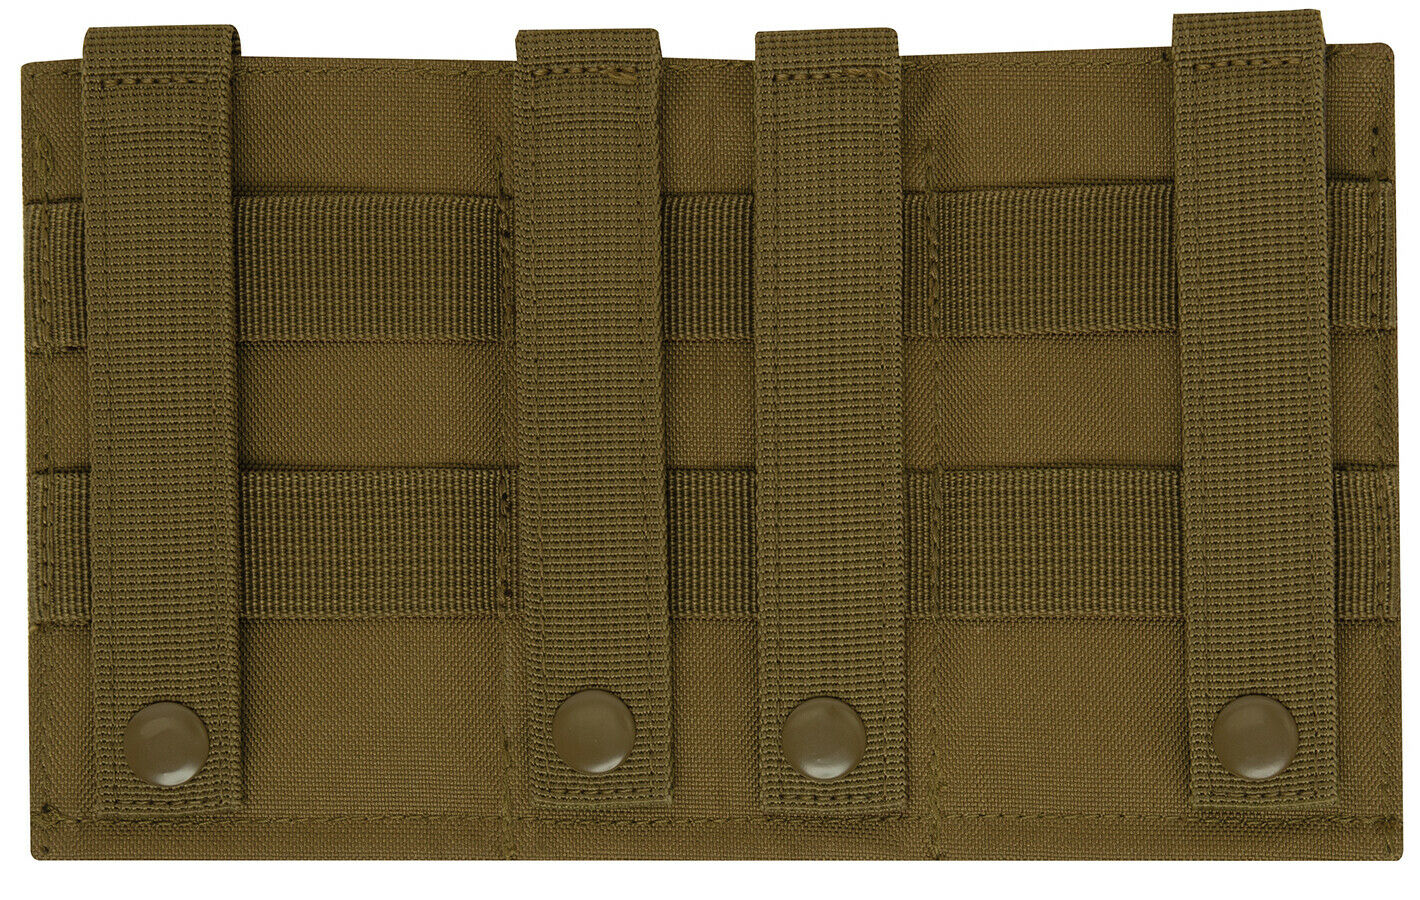 Rothco Lightweight 3 Mag Elastic Retention Pouch - Coyote Brown